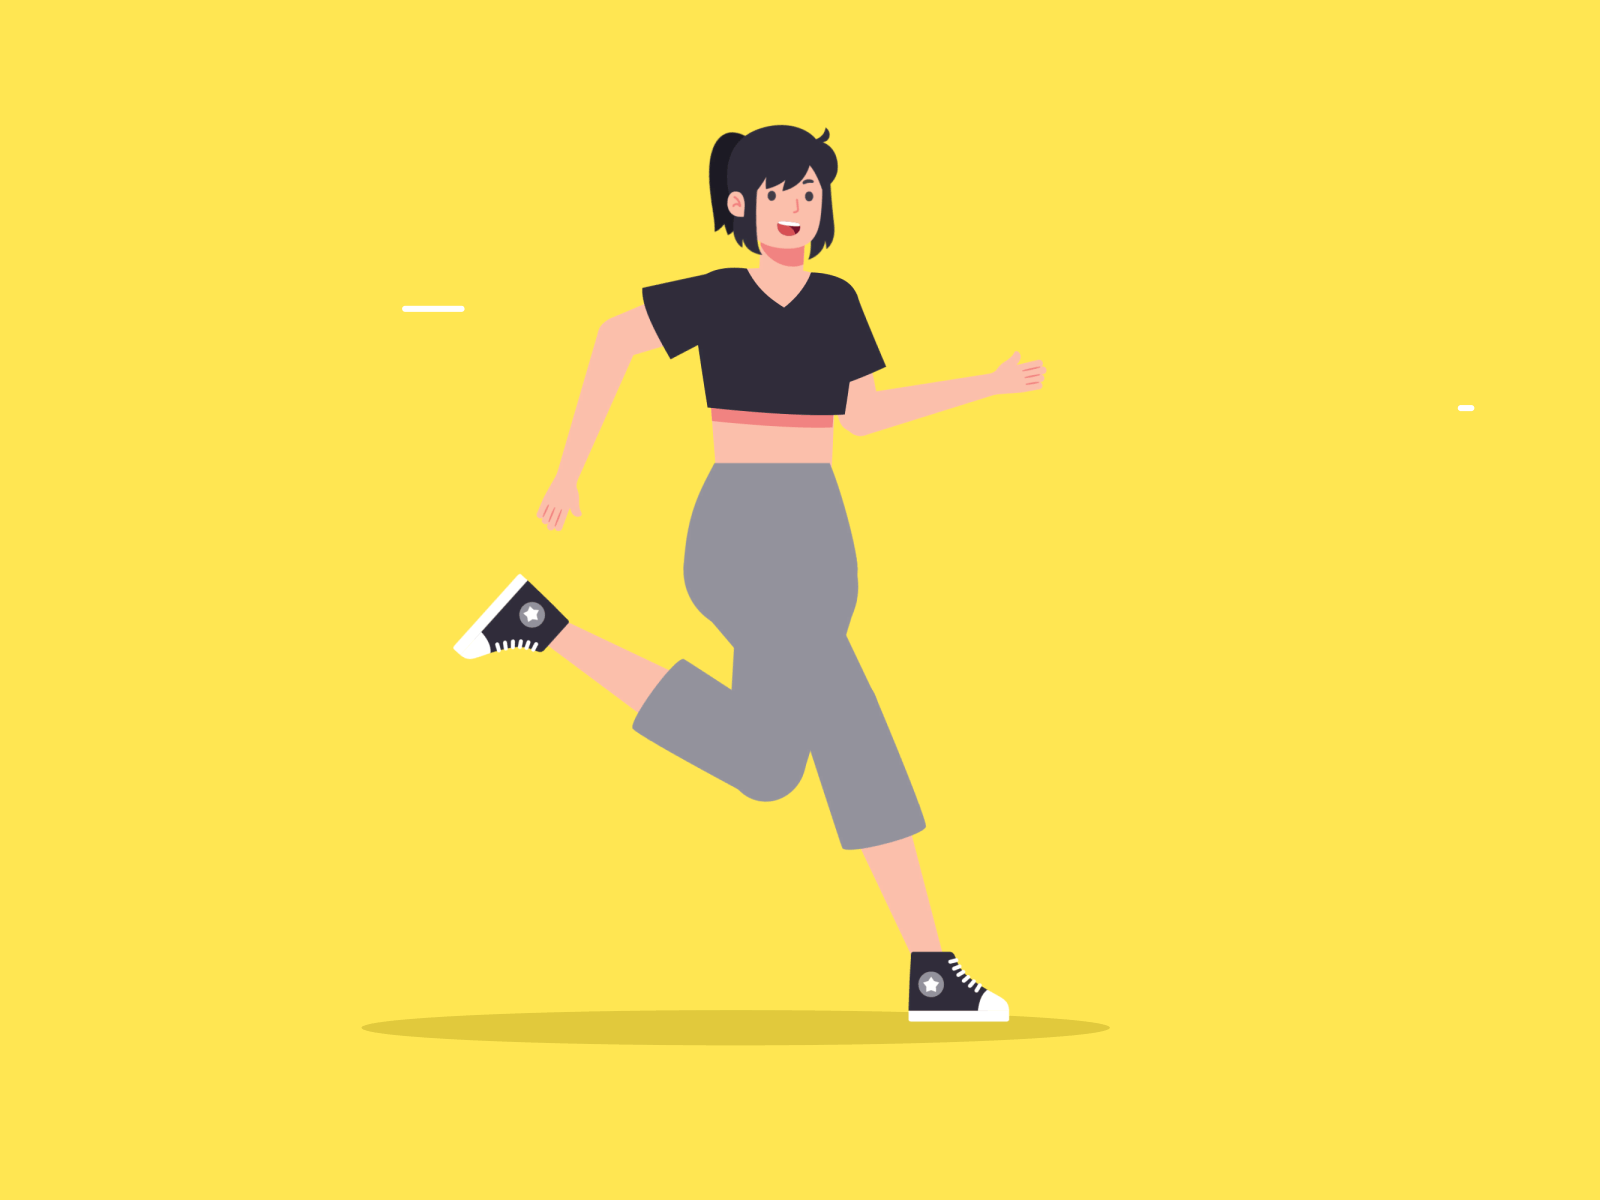 Run cycle animation V2 - Character animation After Effects